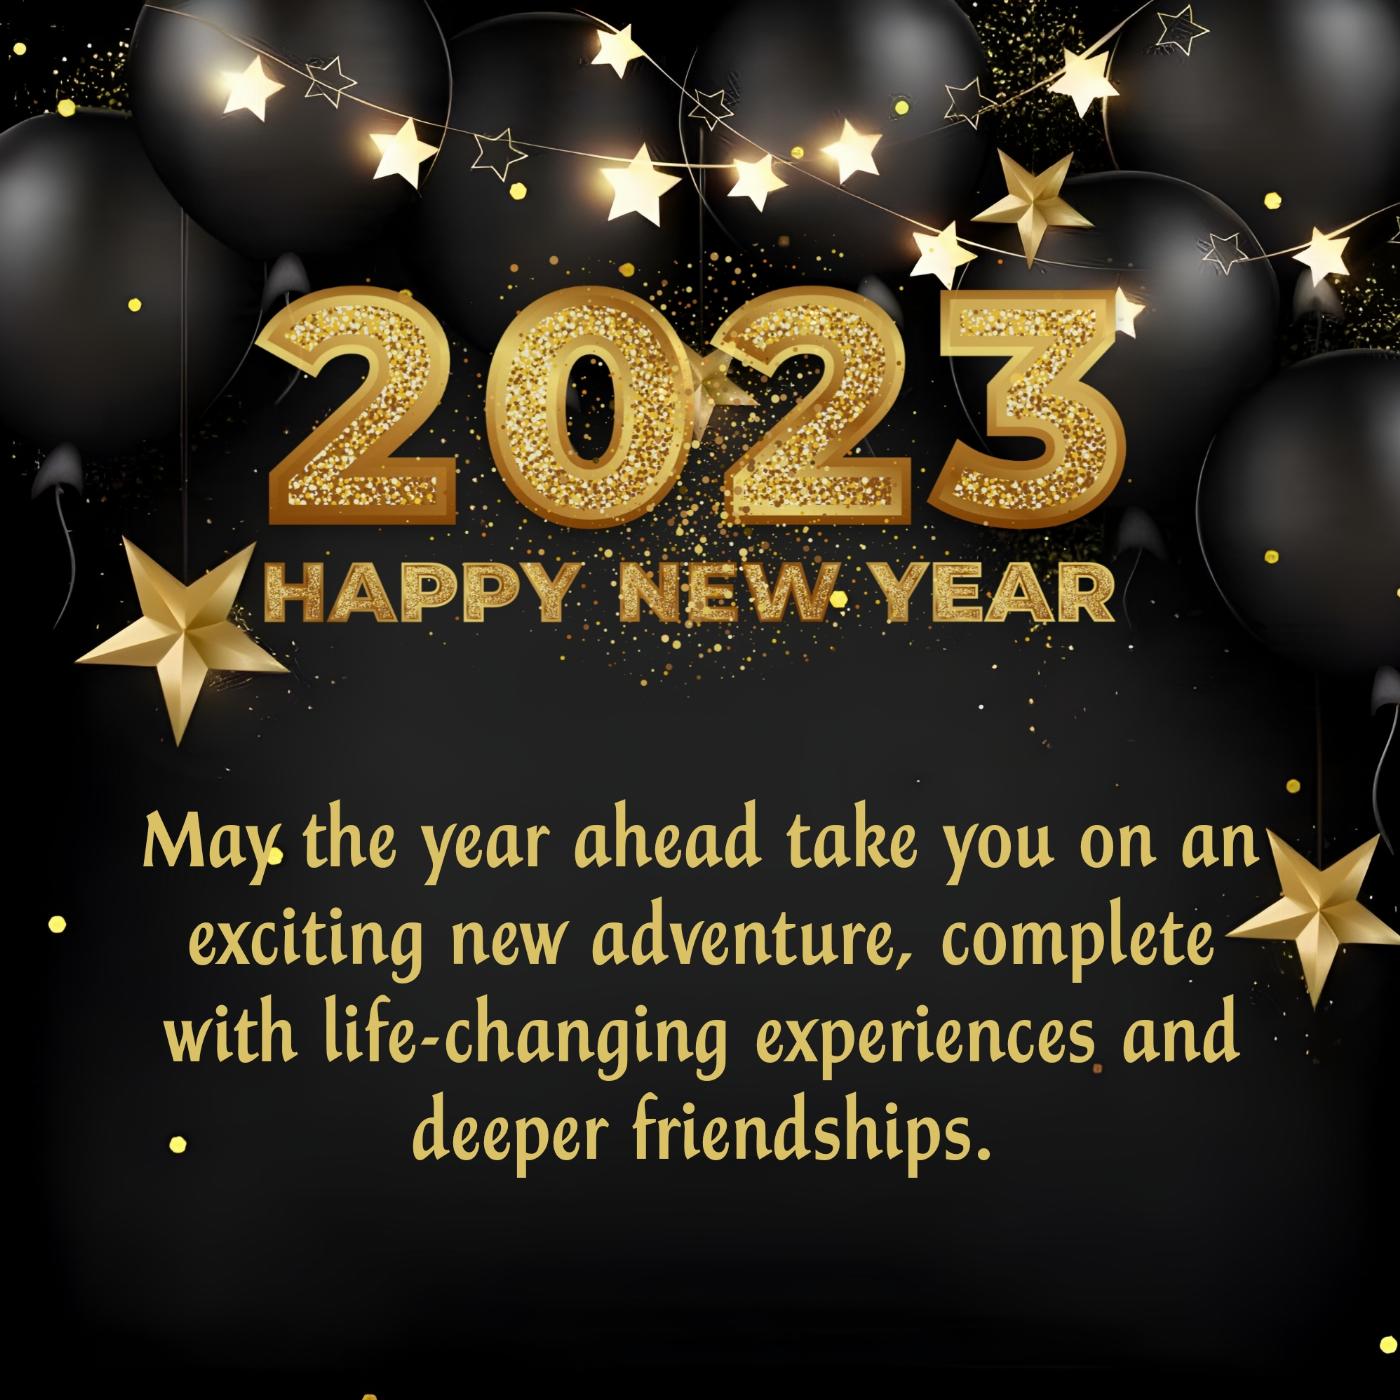 May the year ahead take you on an exciting new adventure